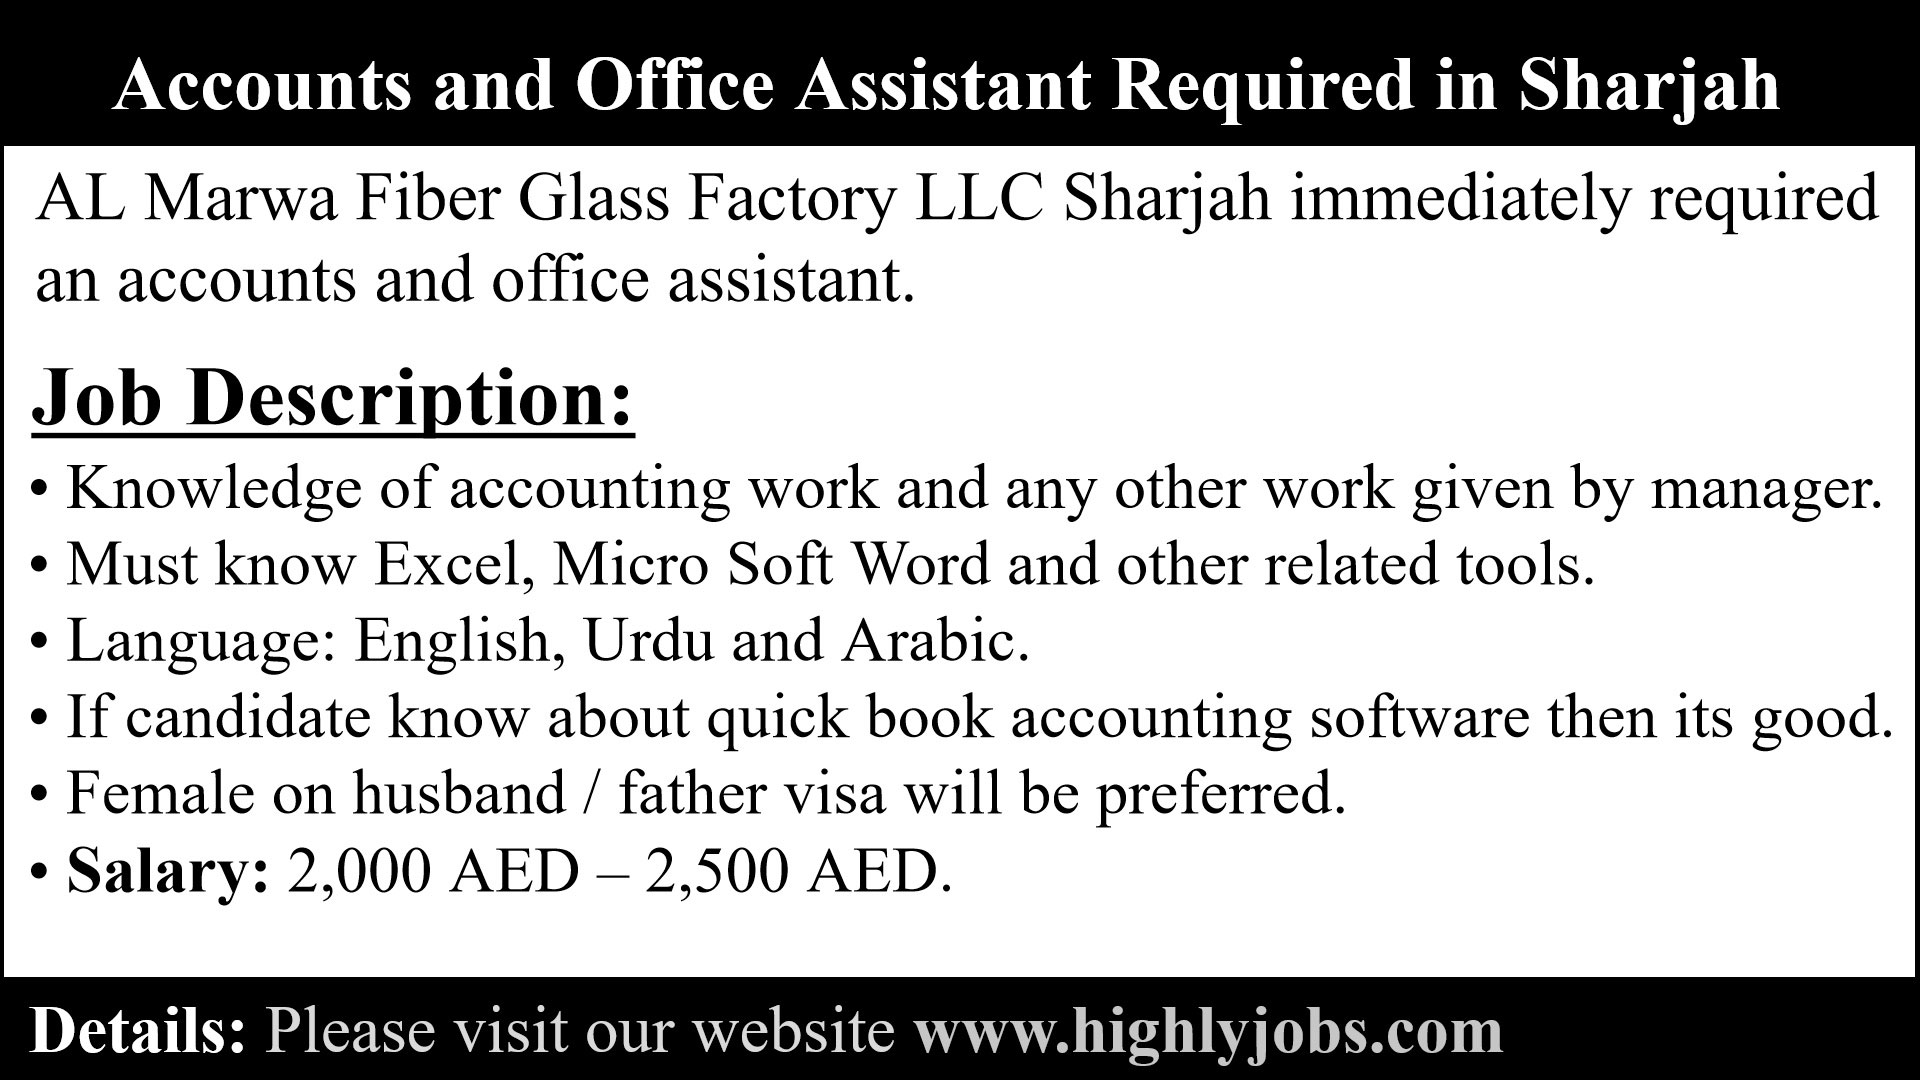 Accounts and Office Assistant Required in Sharjah